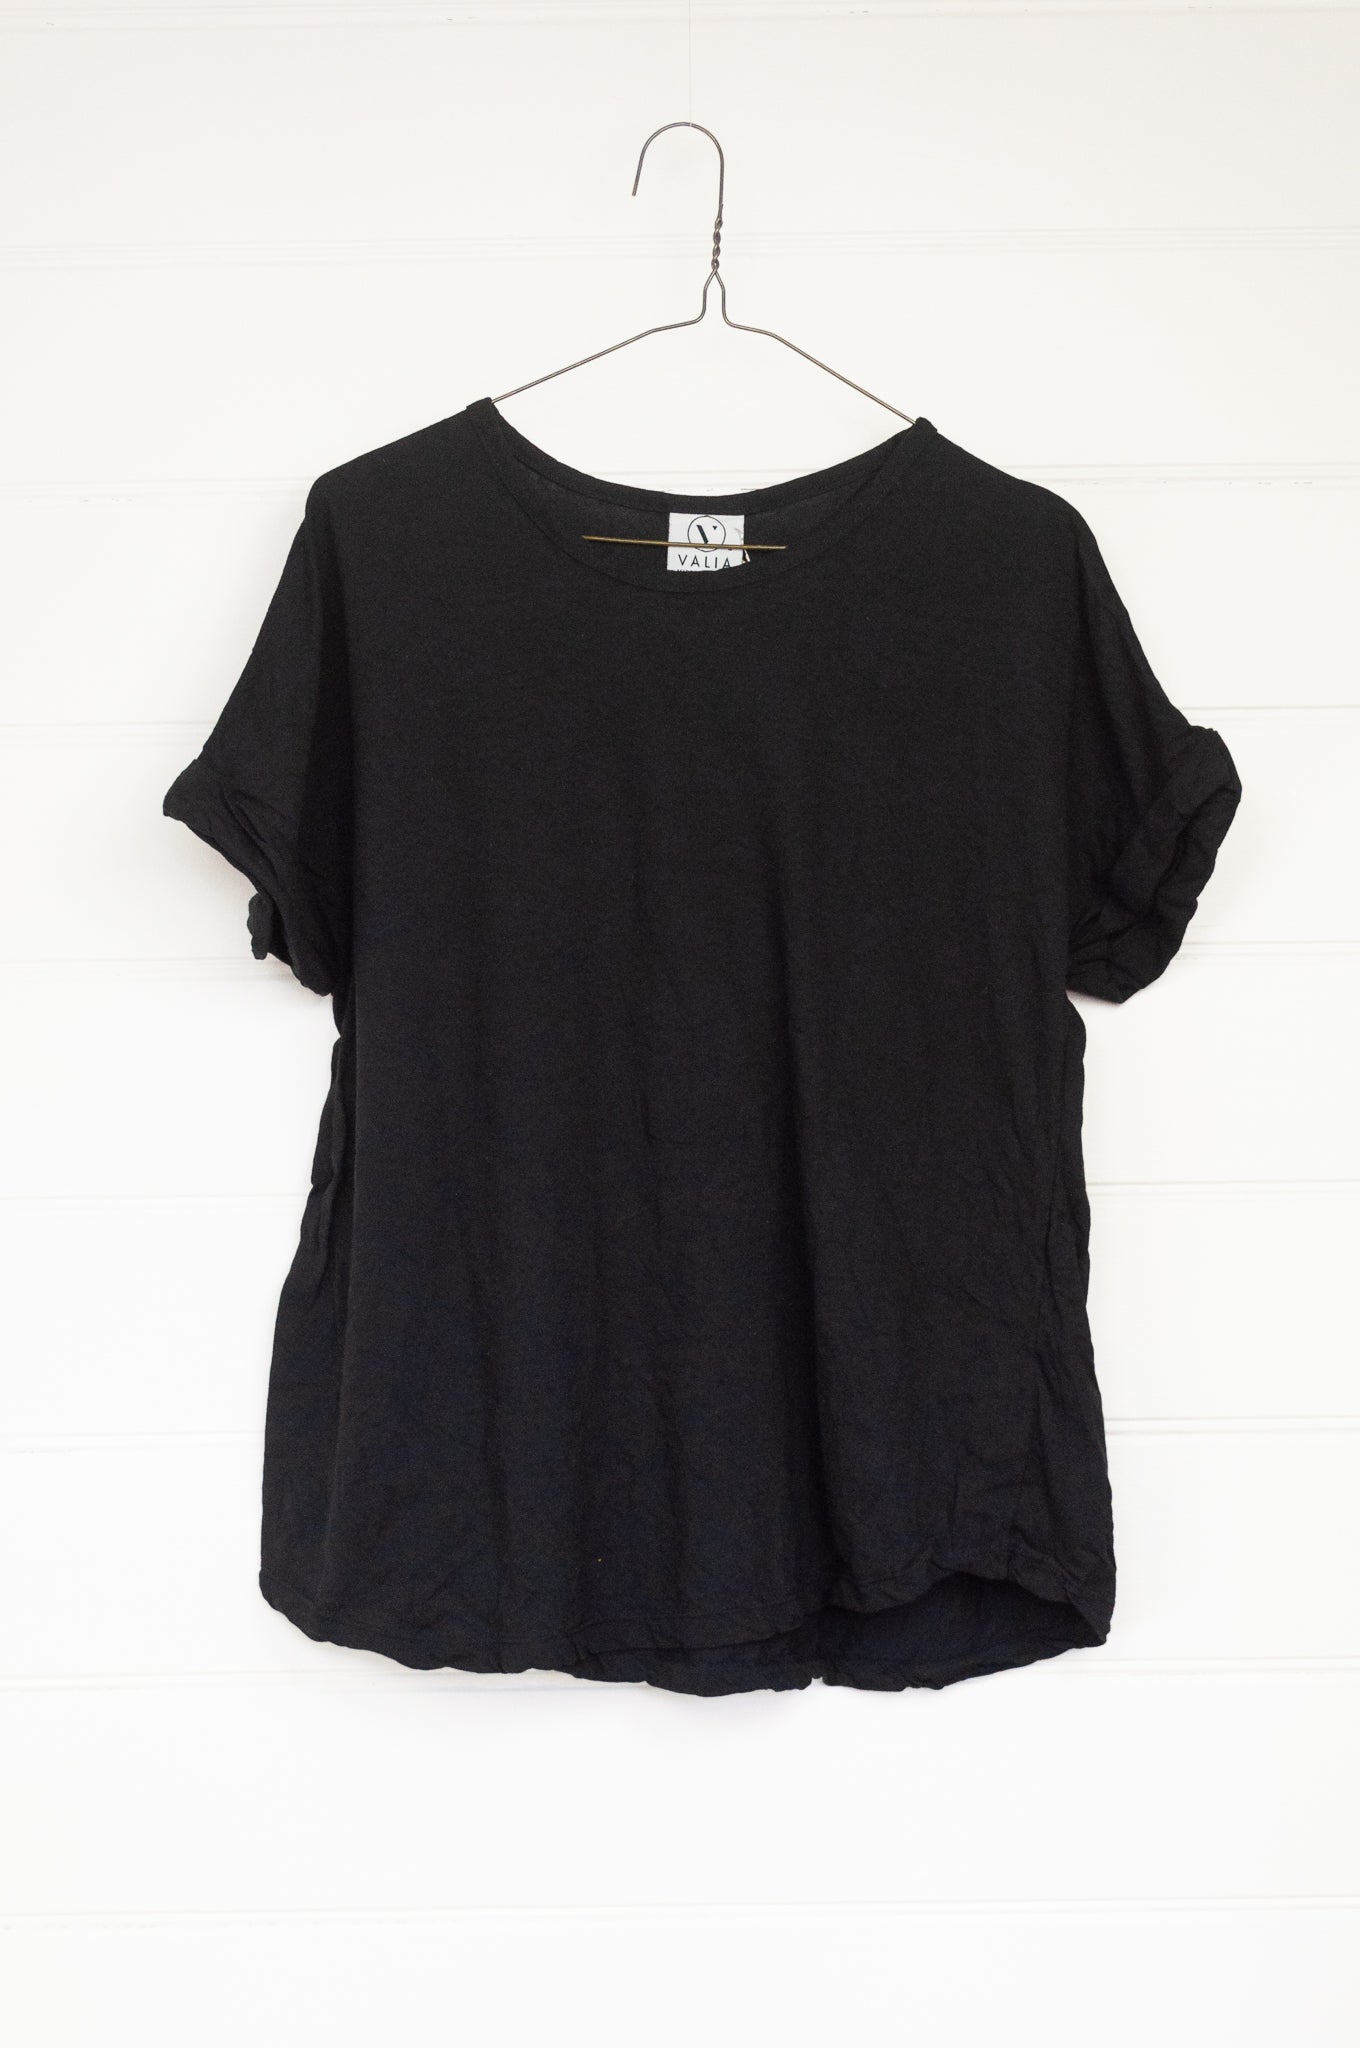 Valia made in Melbourne cotton knit Seaside tshirt top in black.